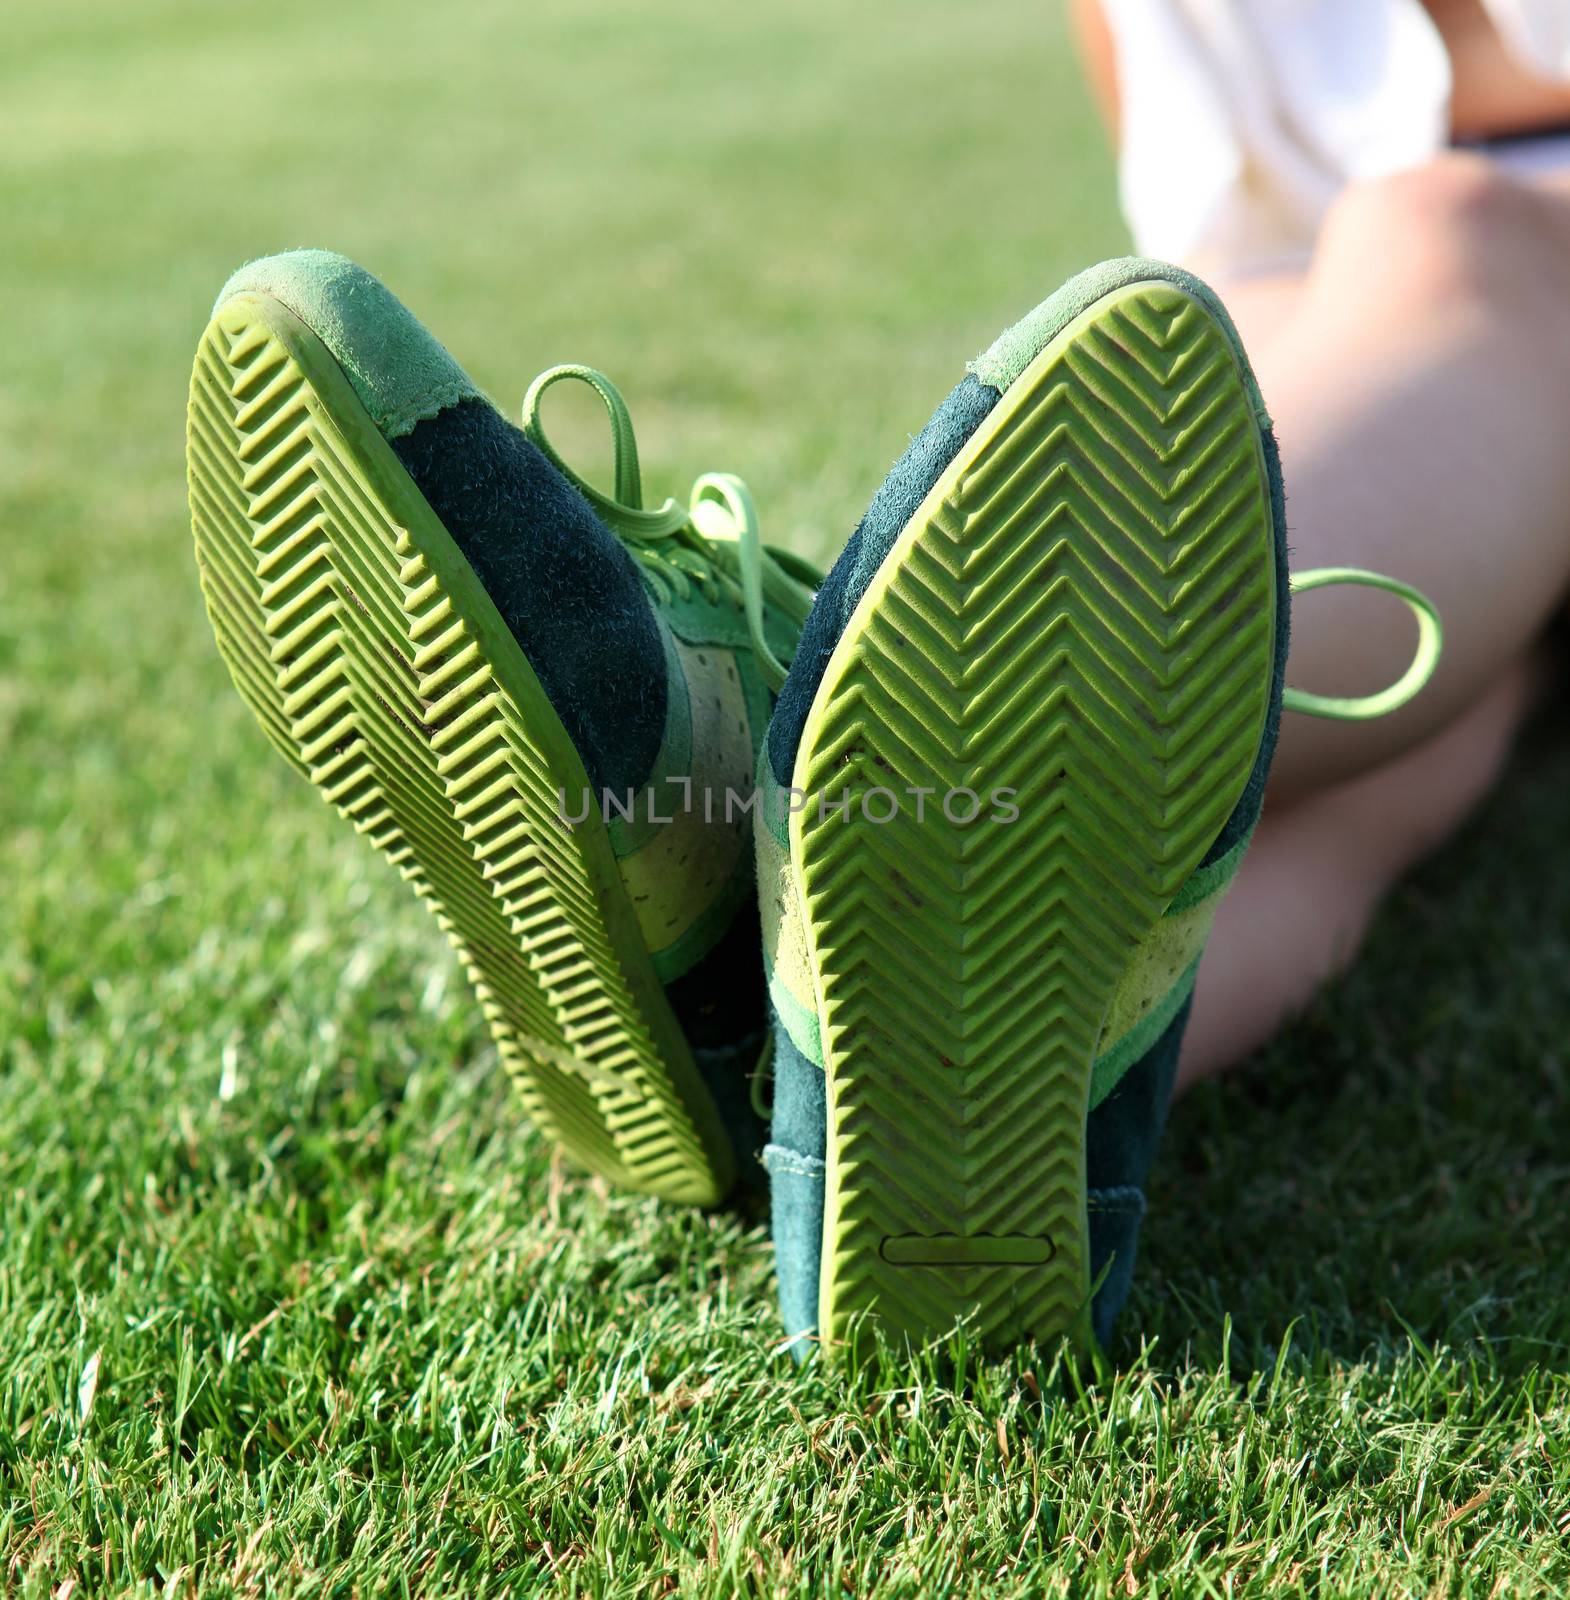 green sole of shoes on grass, gymnastics